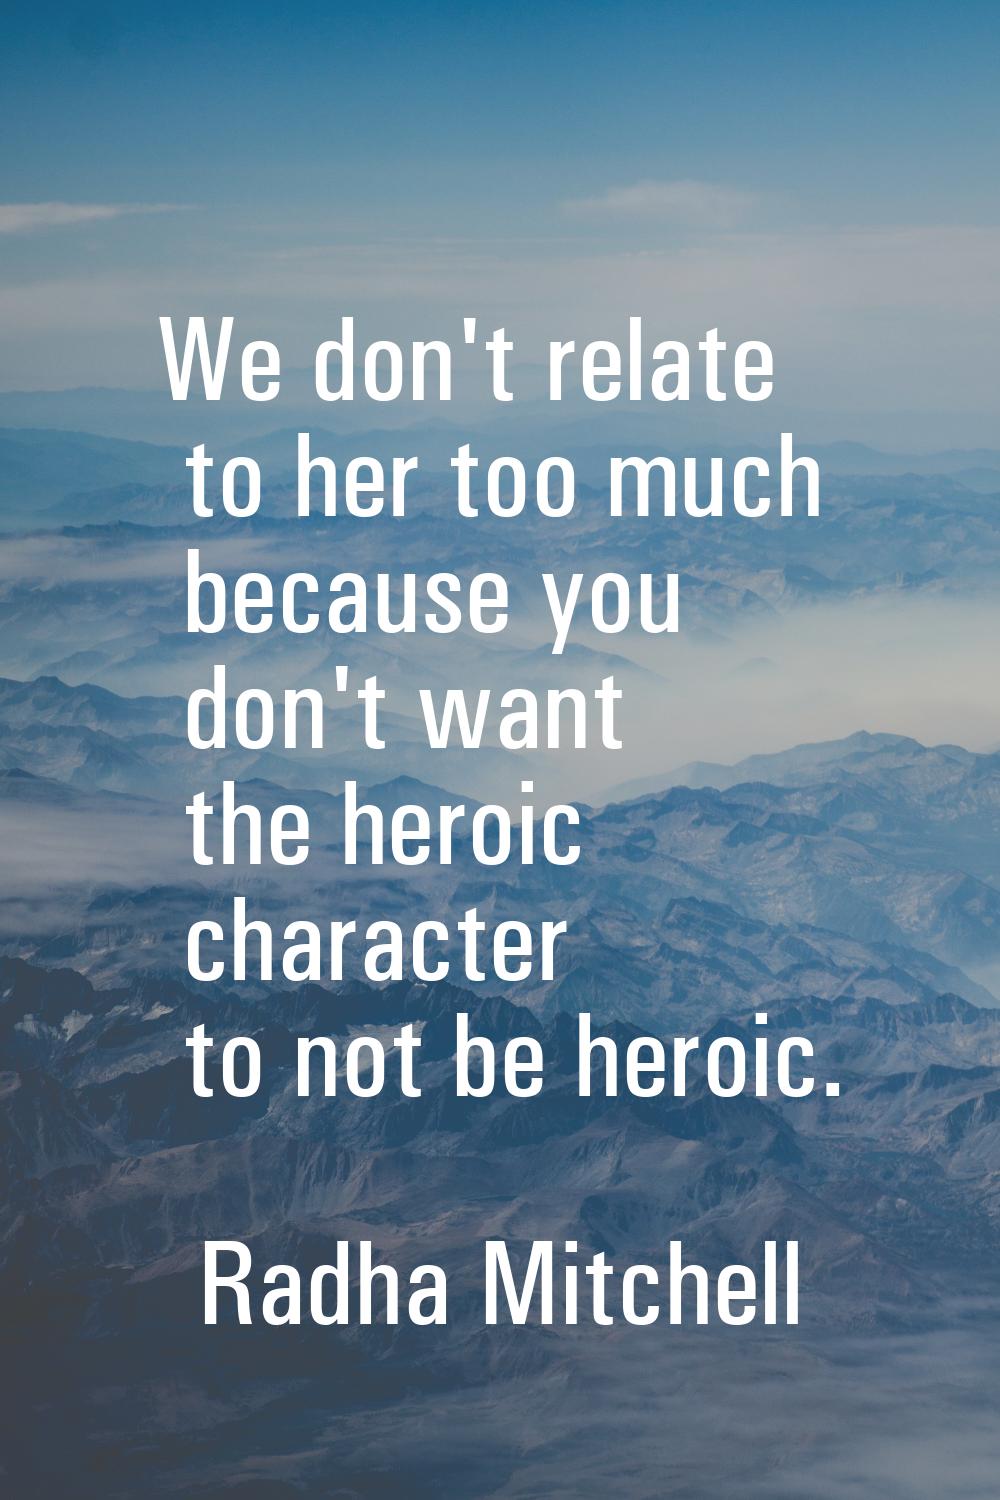 We don't relate to her too much because you don't want the heroic character to not be heroic.